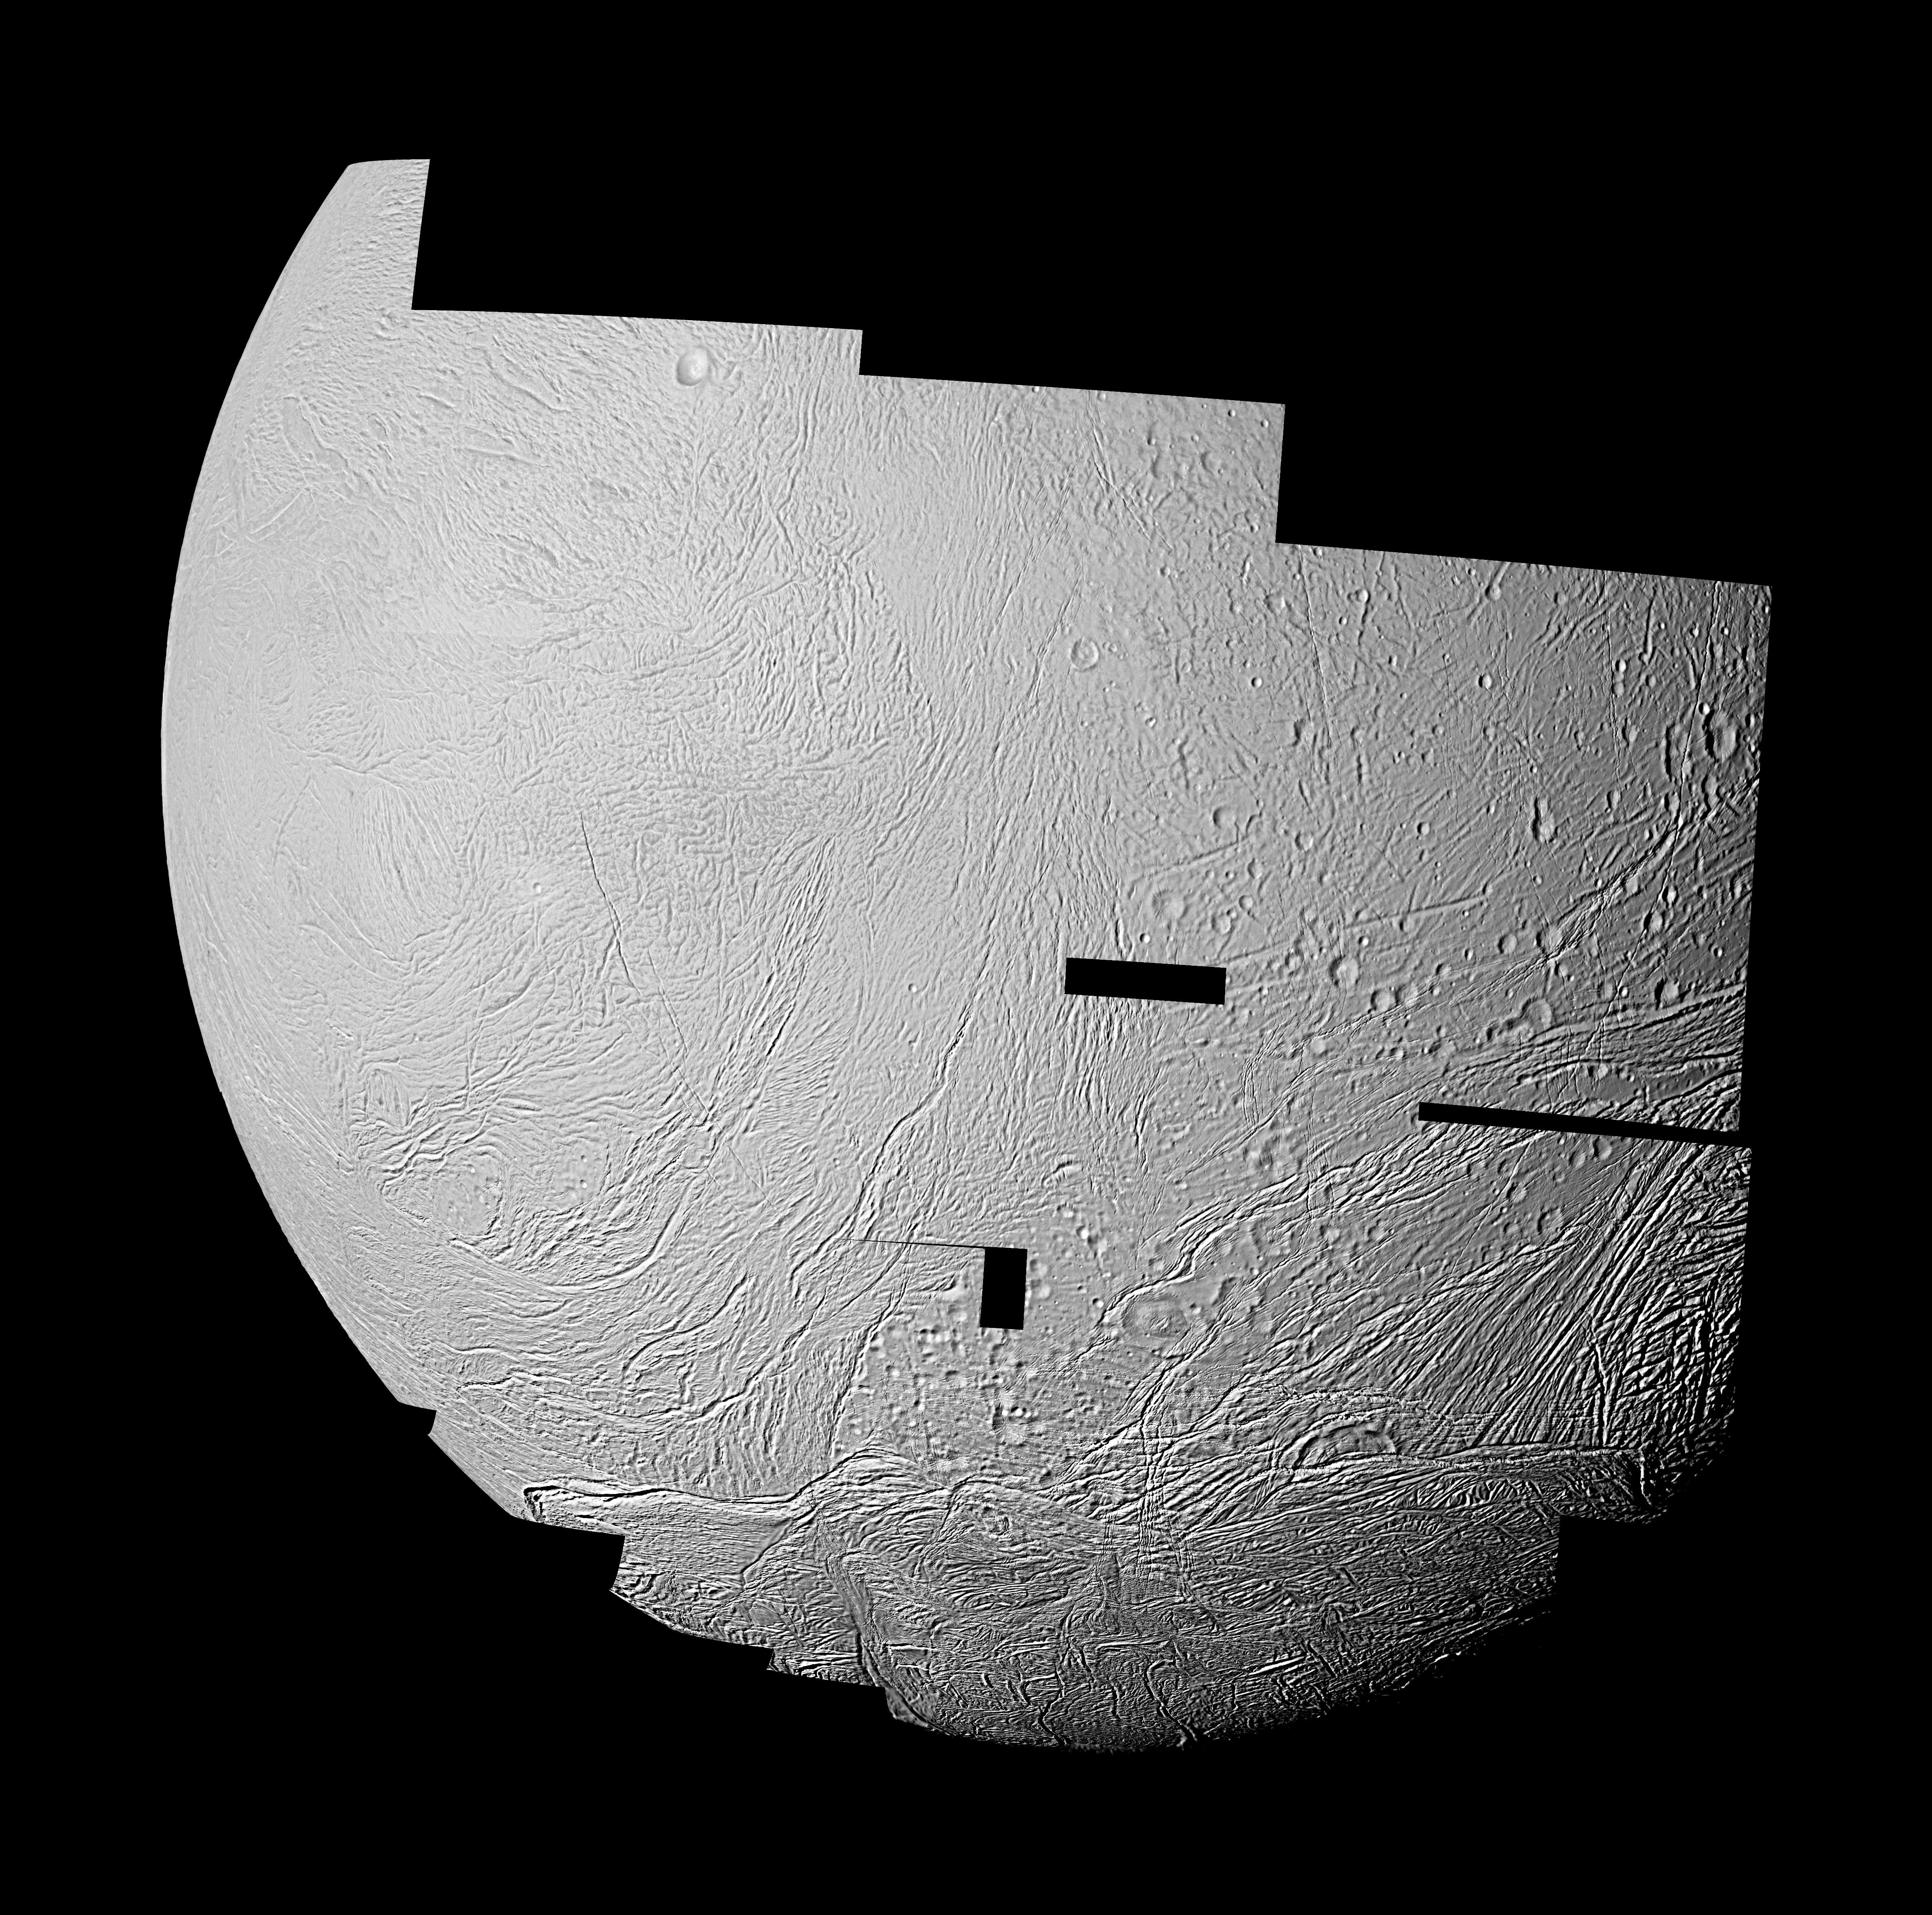 This mosaic features the highest resolution data yet captured by NASA’s Cassini spacecraft of the leading, or western, hemisphere of Saturn’s moon Enceladus.